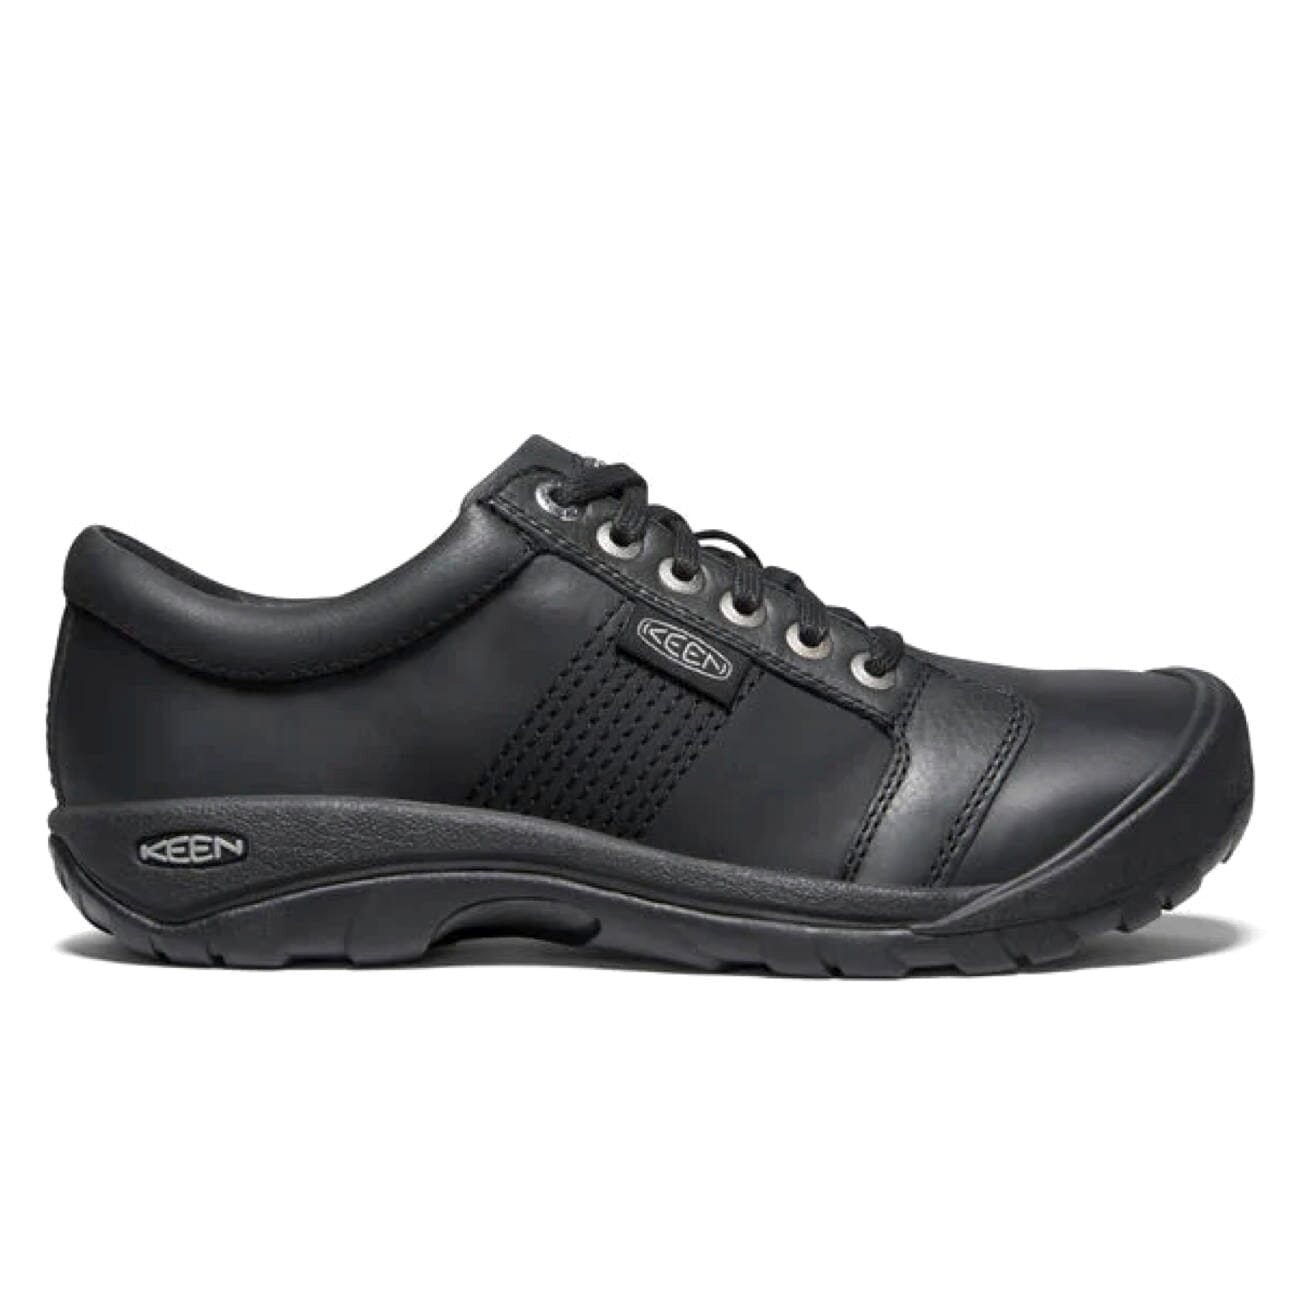 Keen, Austin Casual Mens, Shoes, Leather, Black Shoes Keen Black US 10 